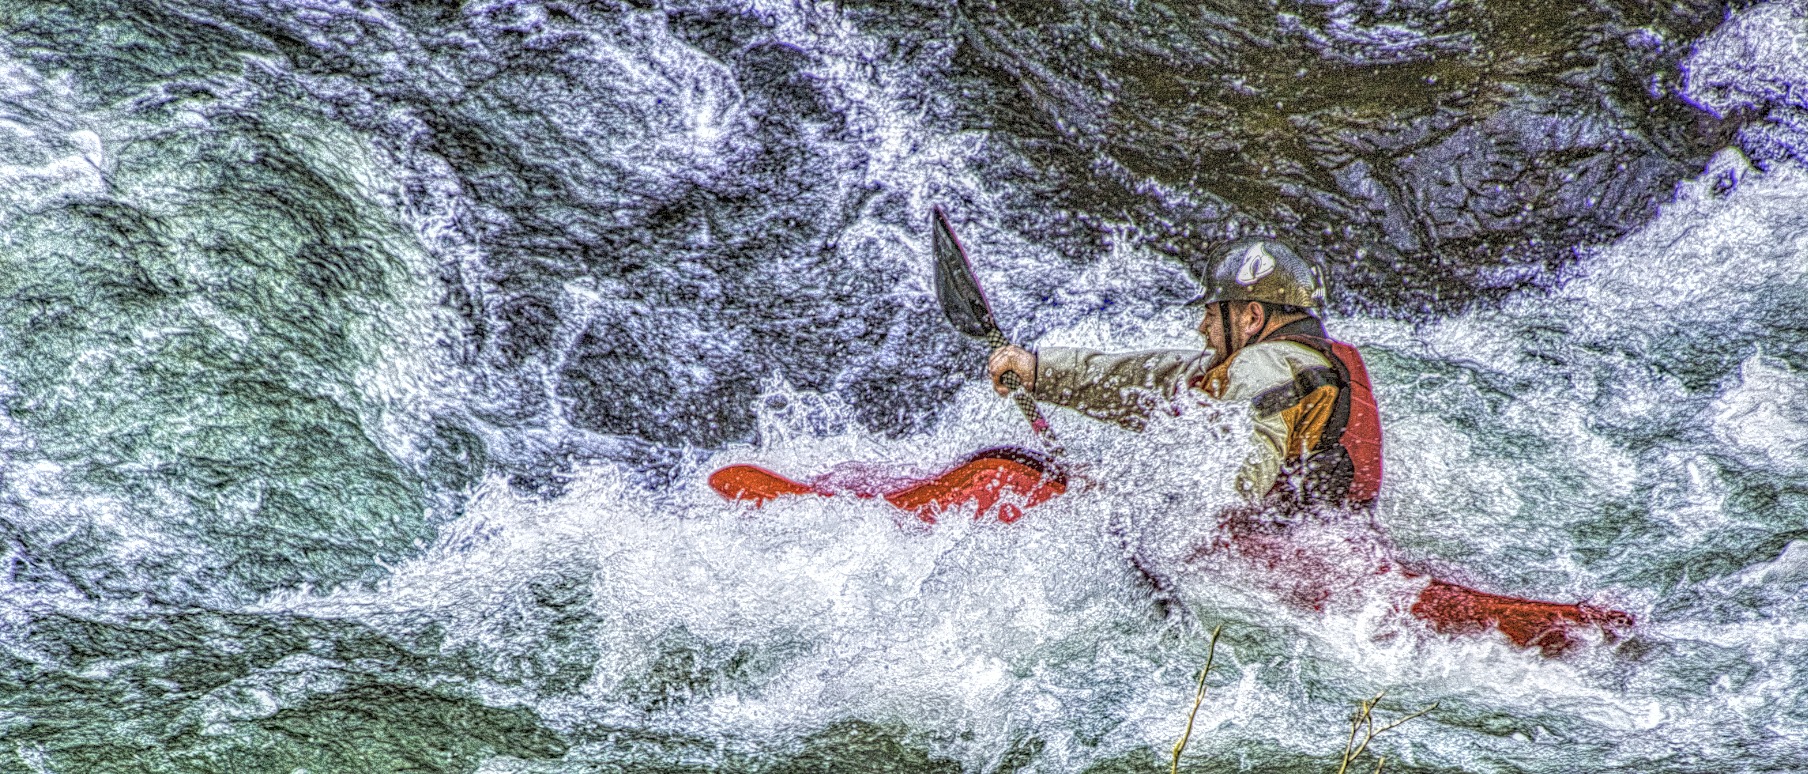 Man in kayak trying to paddle up stream